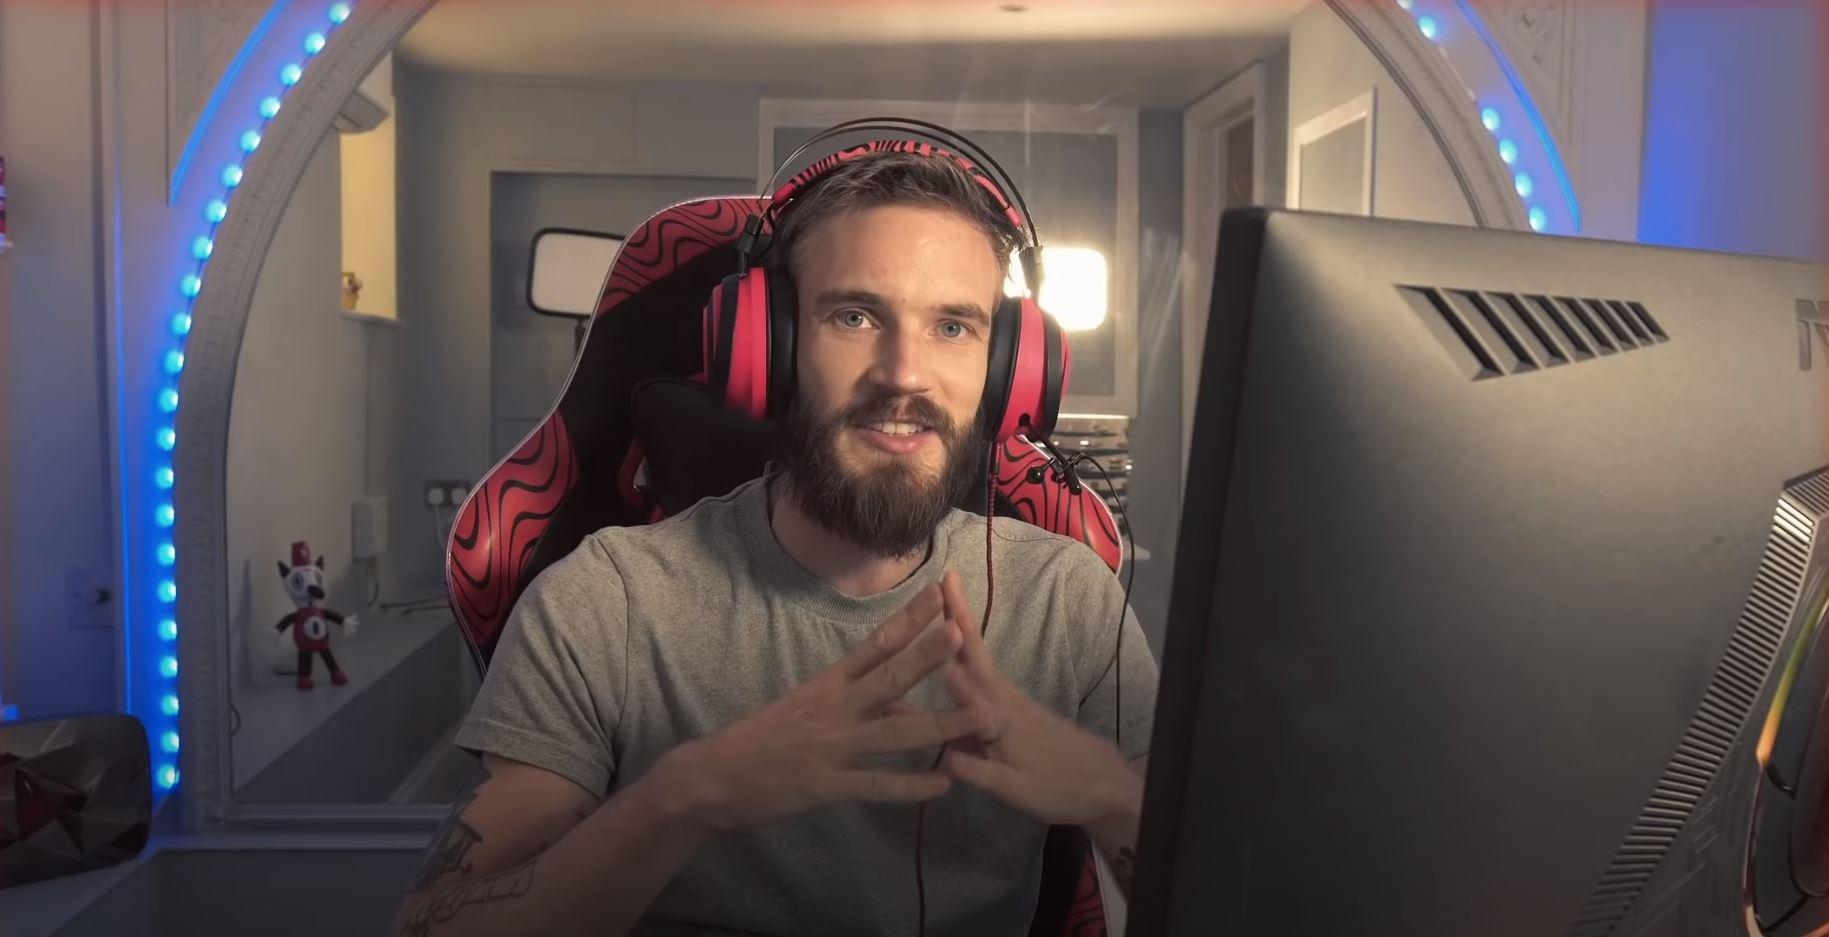 PewDiePie sits at his streaming station and speaks to the camera.